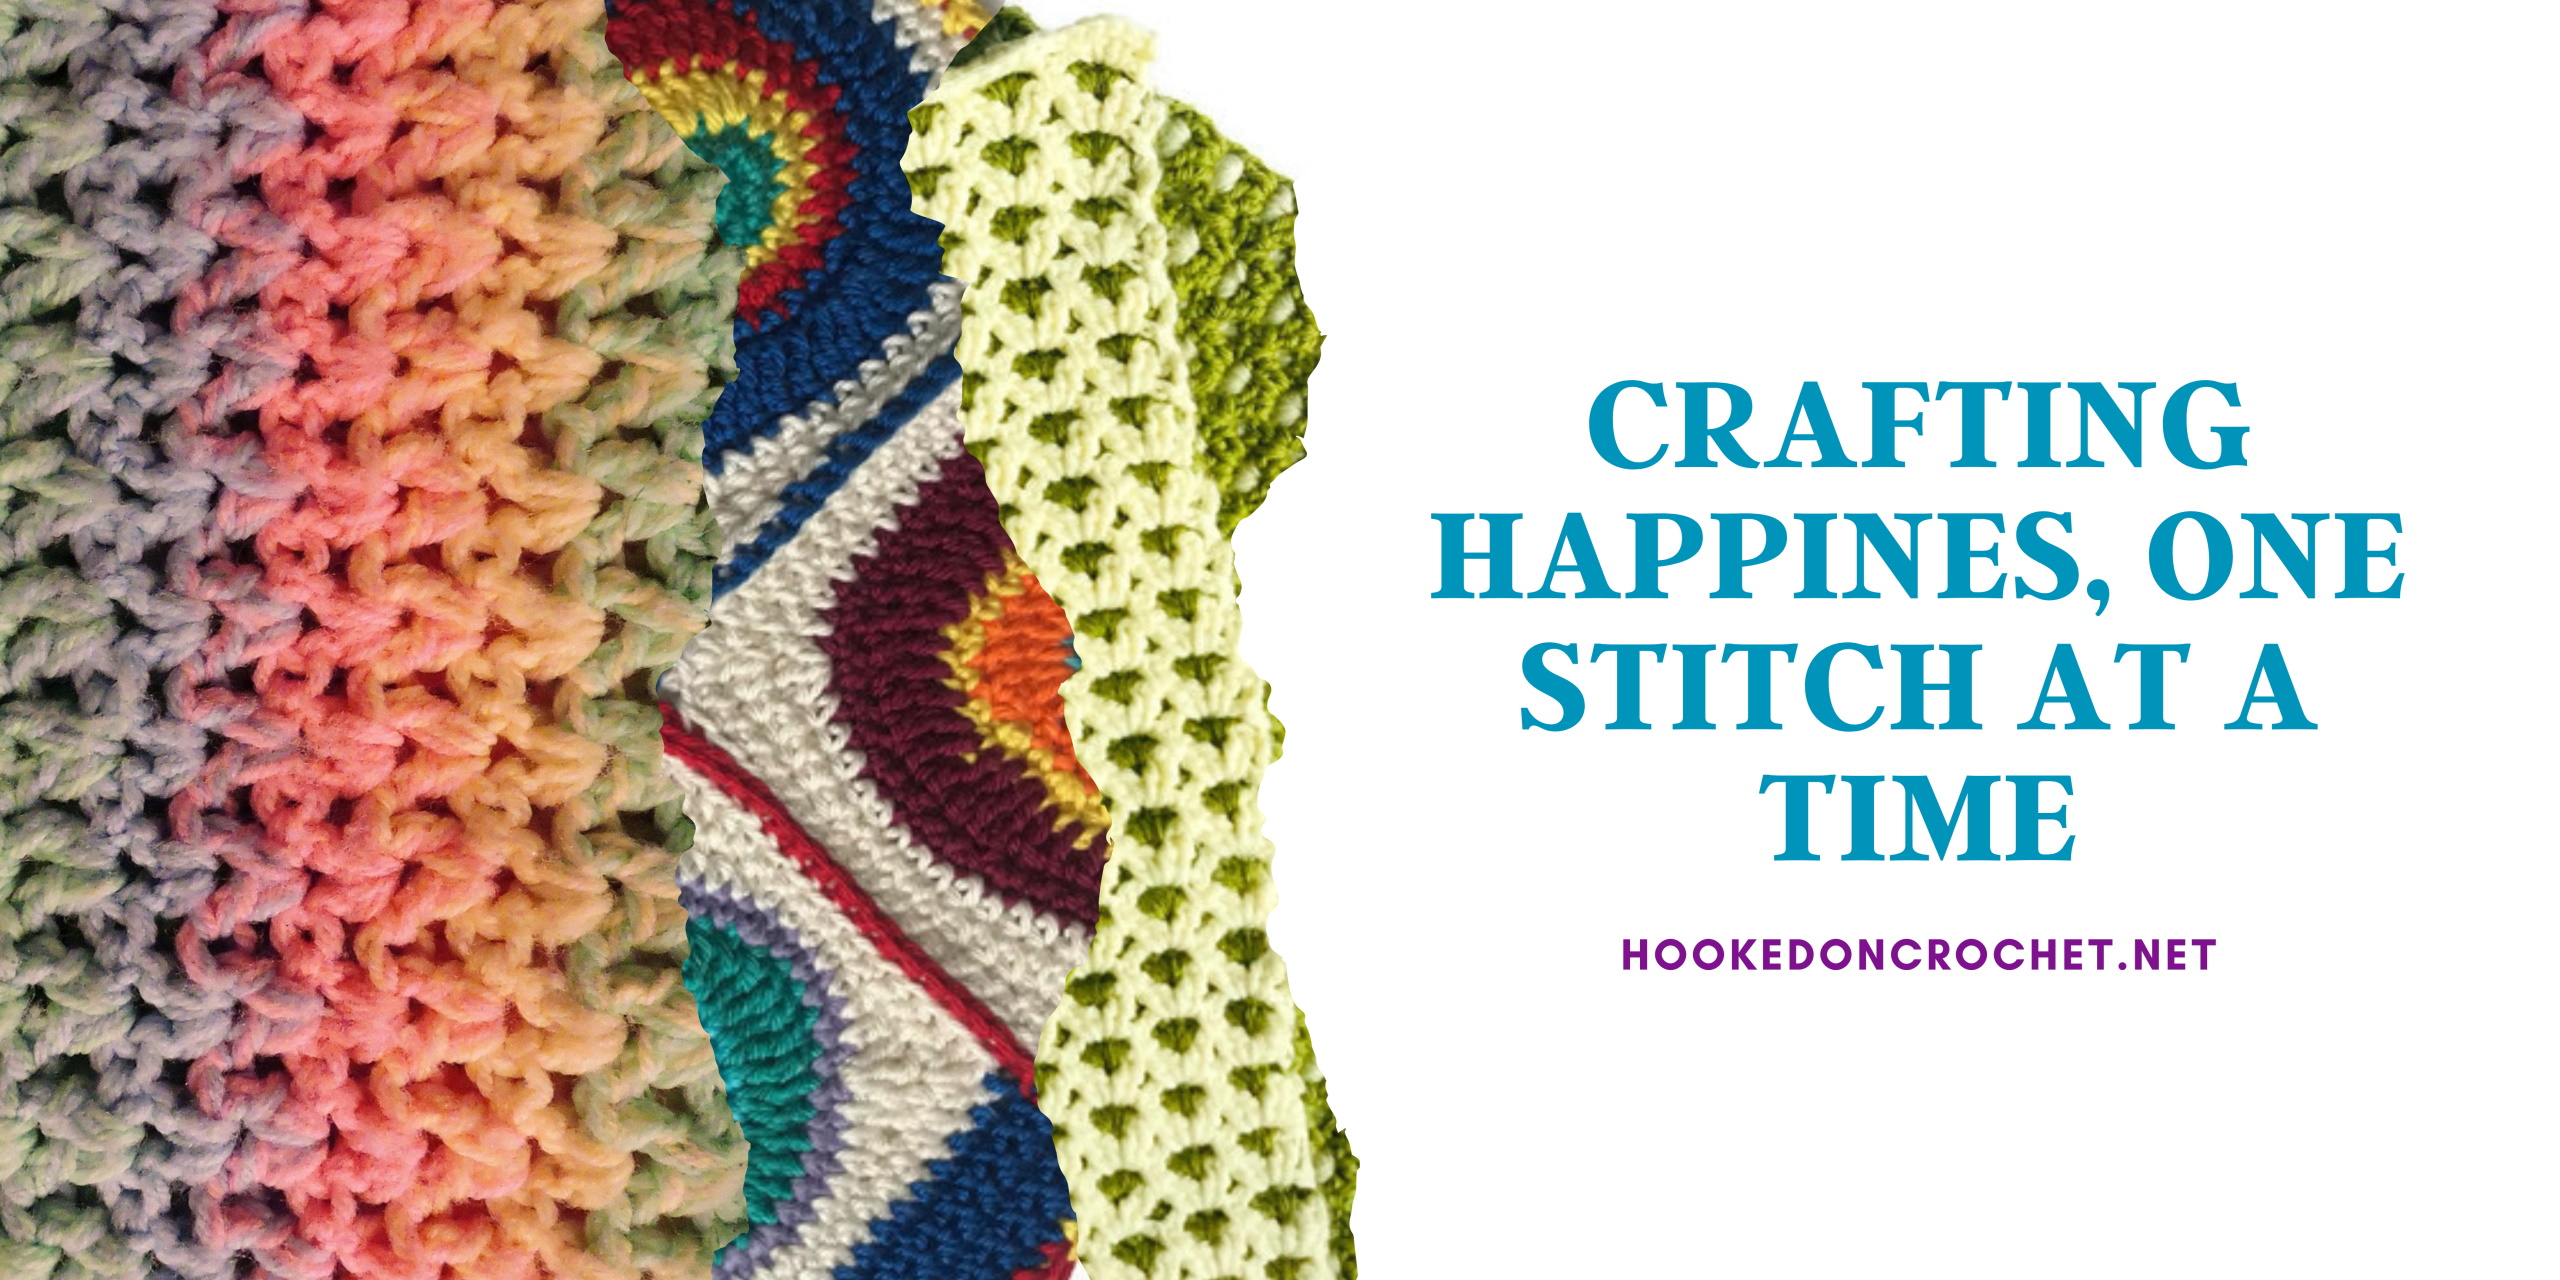 3 different crochet textures with the name HookedOnCrochet.net